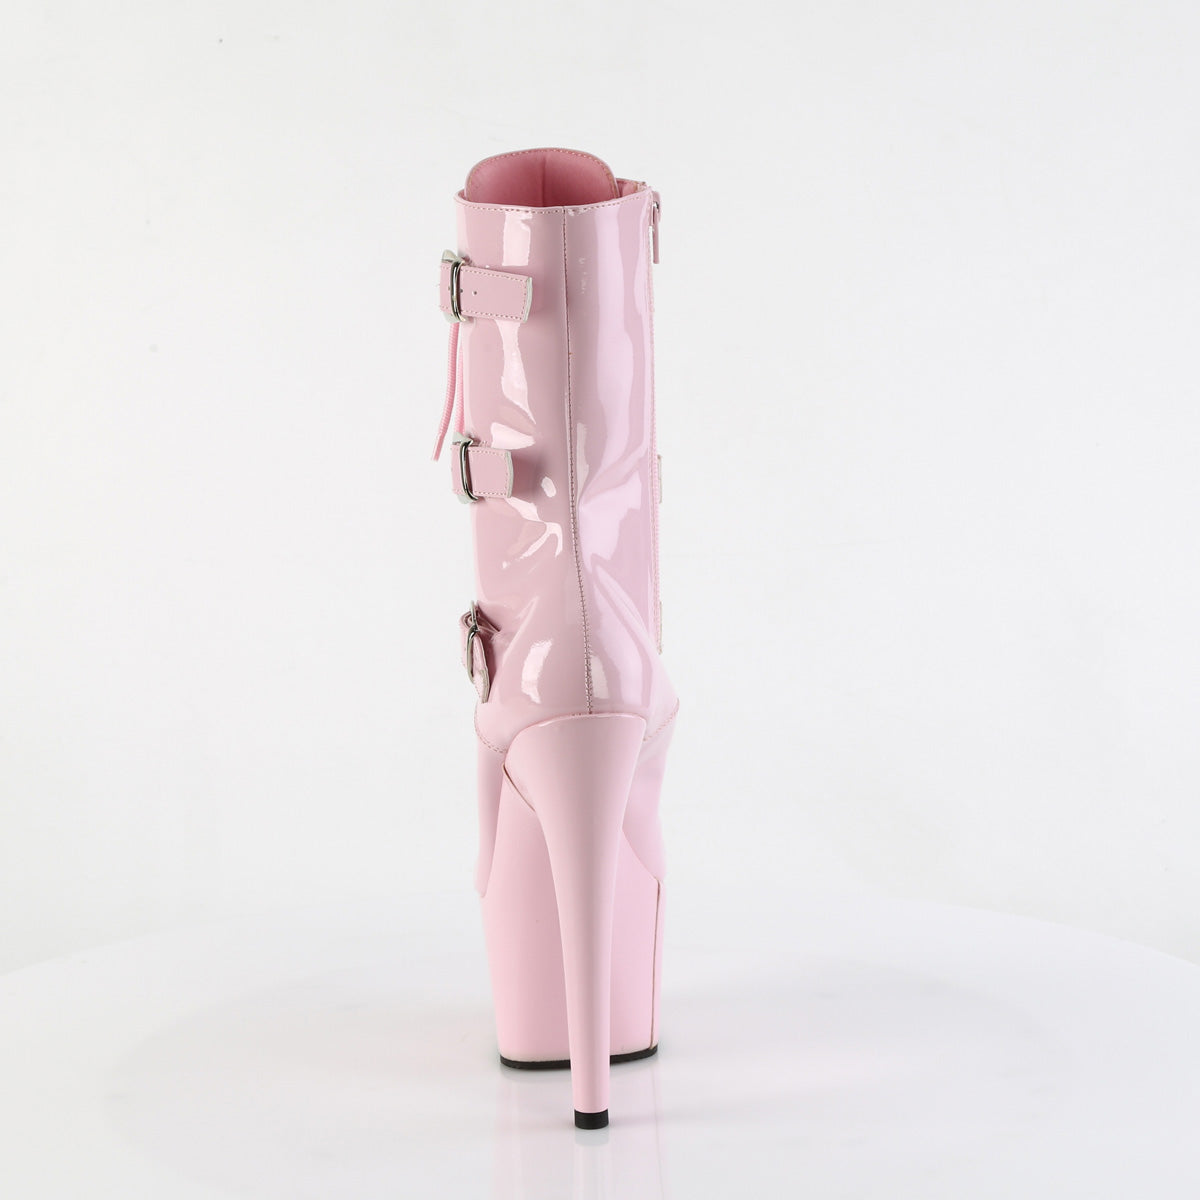 7 Inch Heel ADORE-1043 Baby Pink Patent